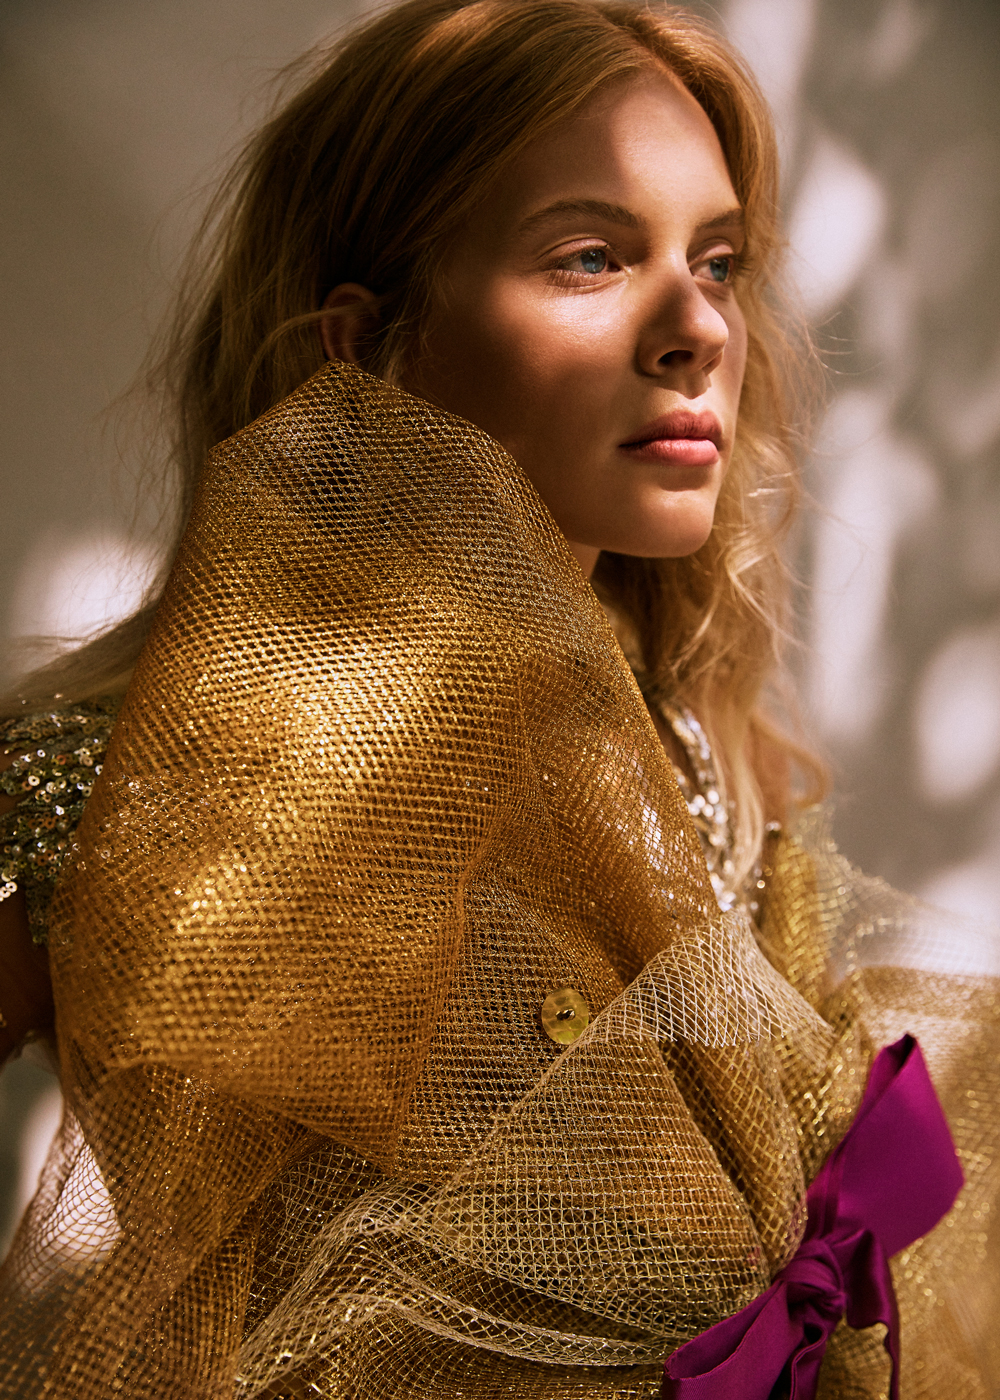 Marthe Hennink Exclusively for Fashion Editorials with Anouk Smits